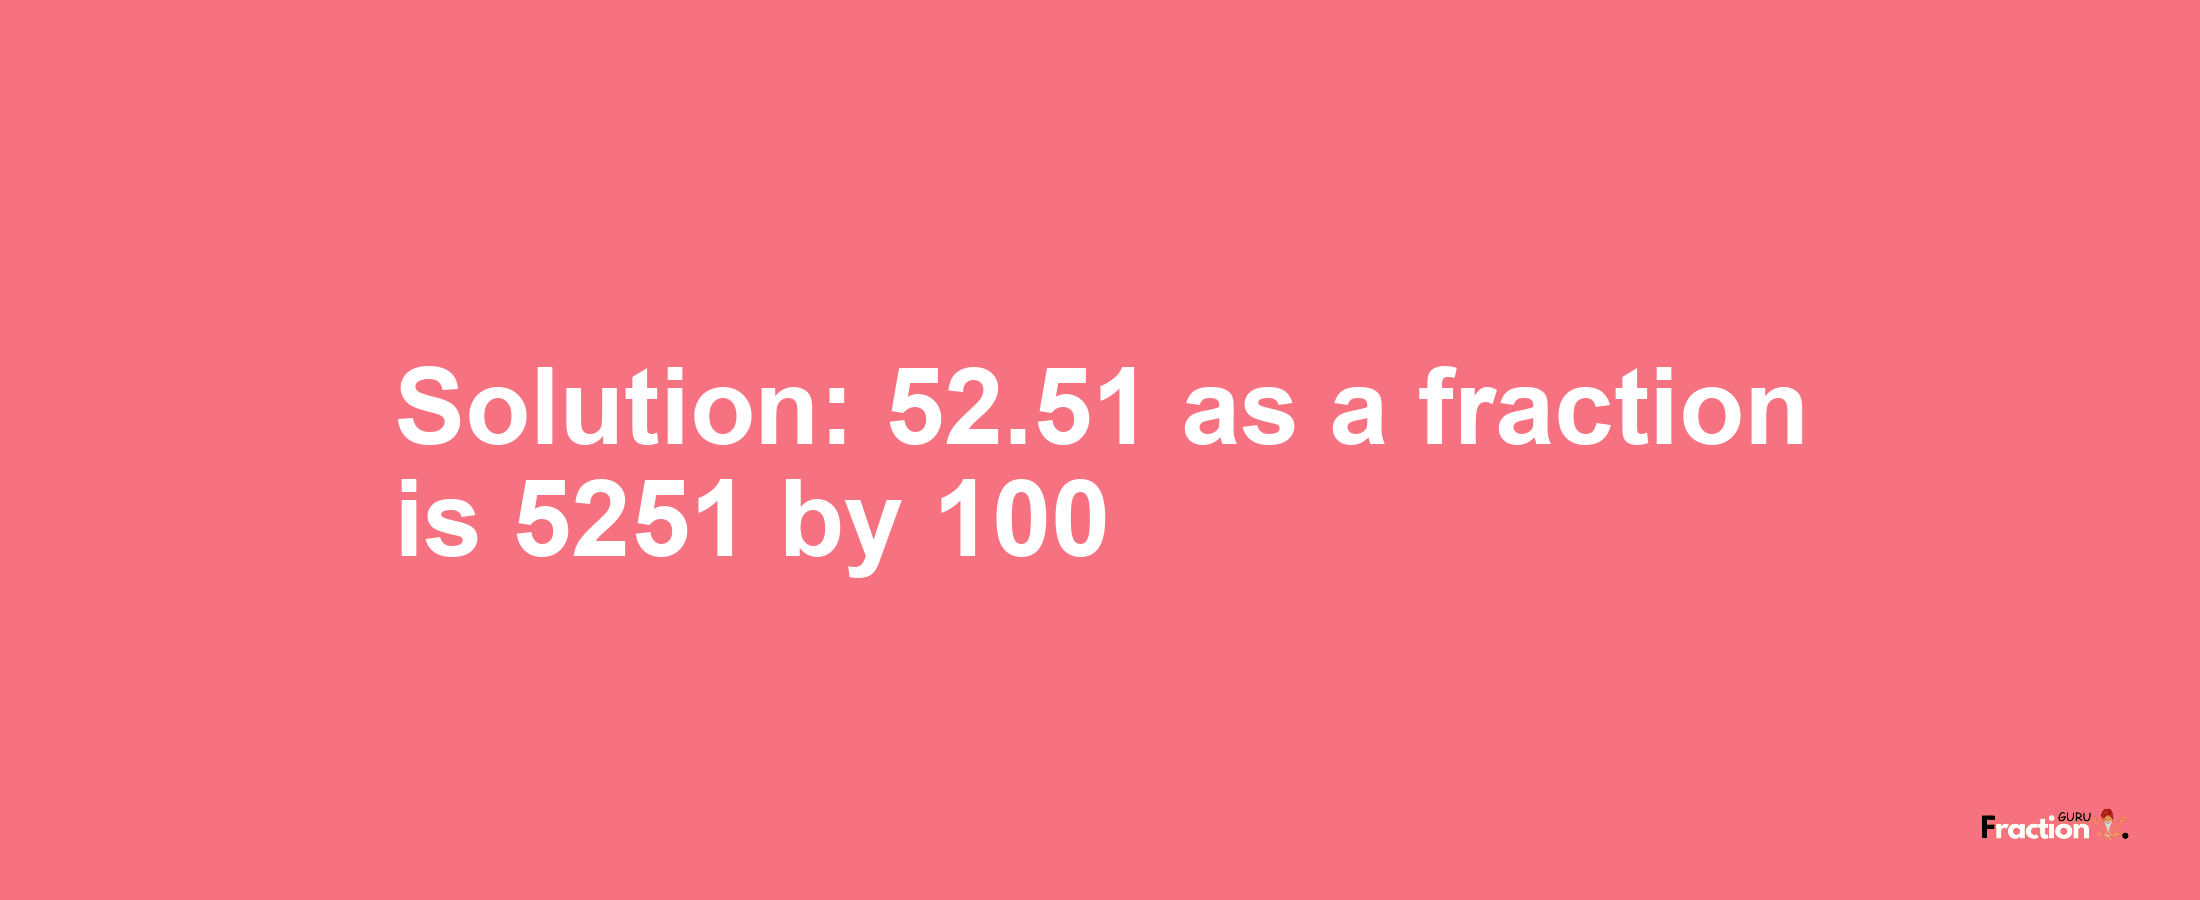 Solution:52.51 as a fraction is 5251/100